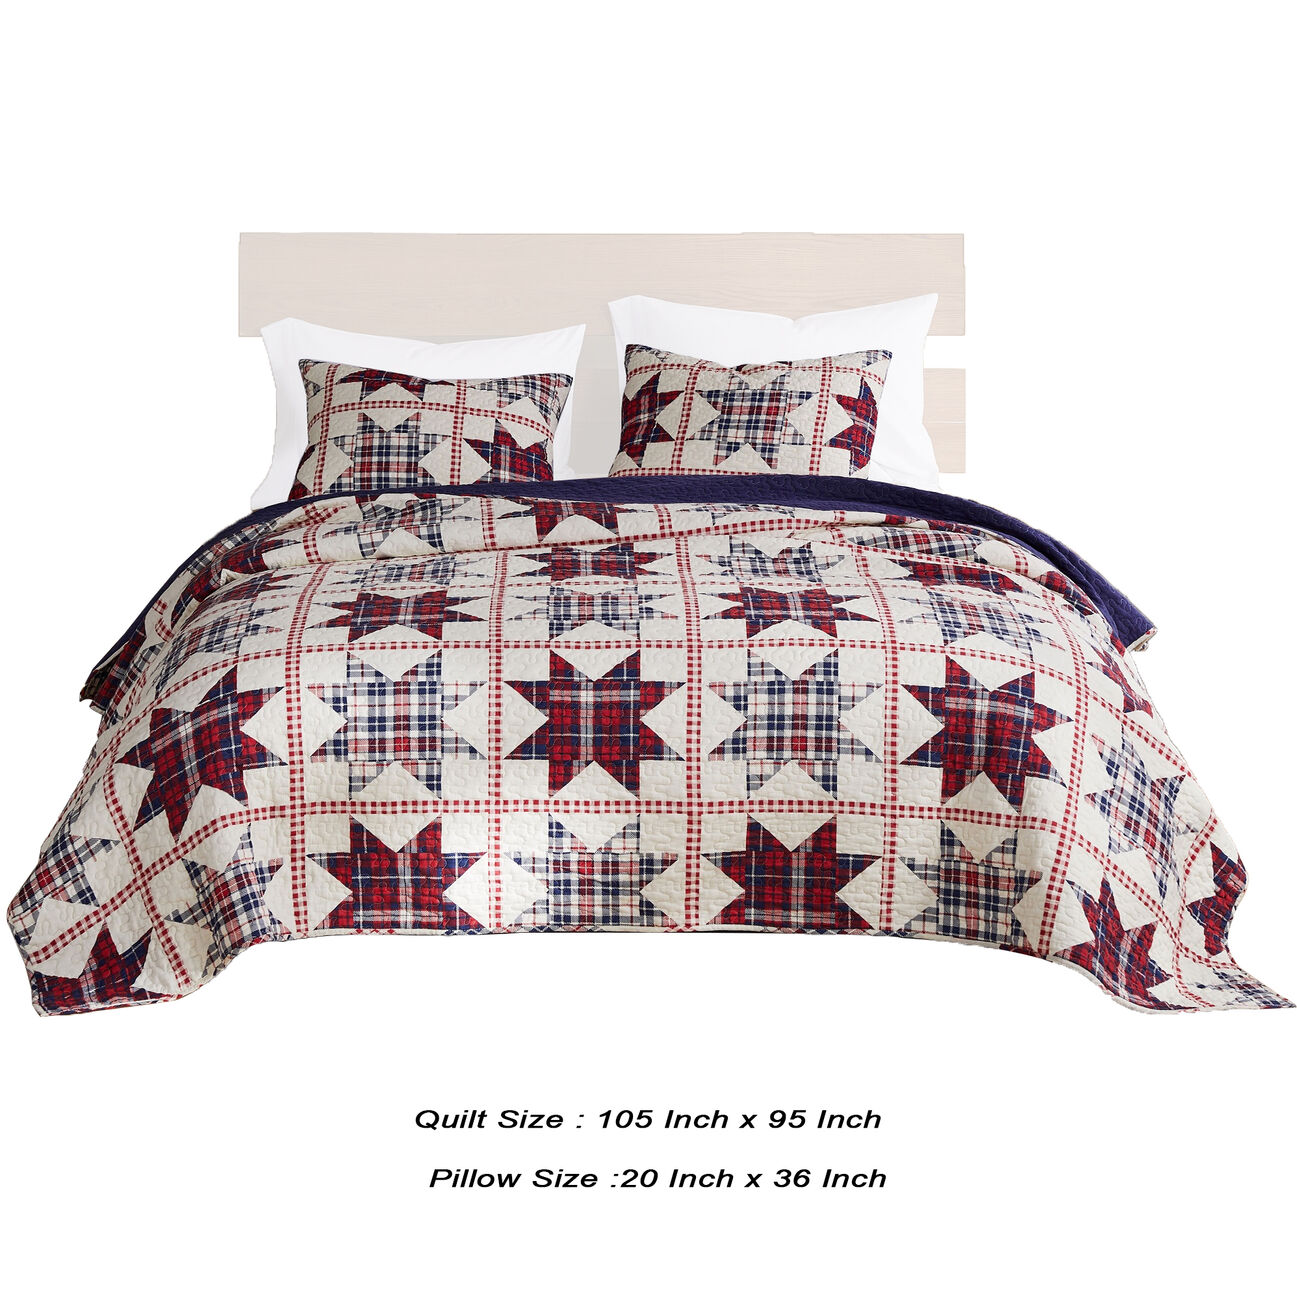 Munich 3 Piece Plaid Pattern Star Patchwork King Quilt Set, Red and Off White